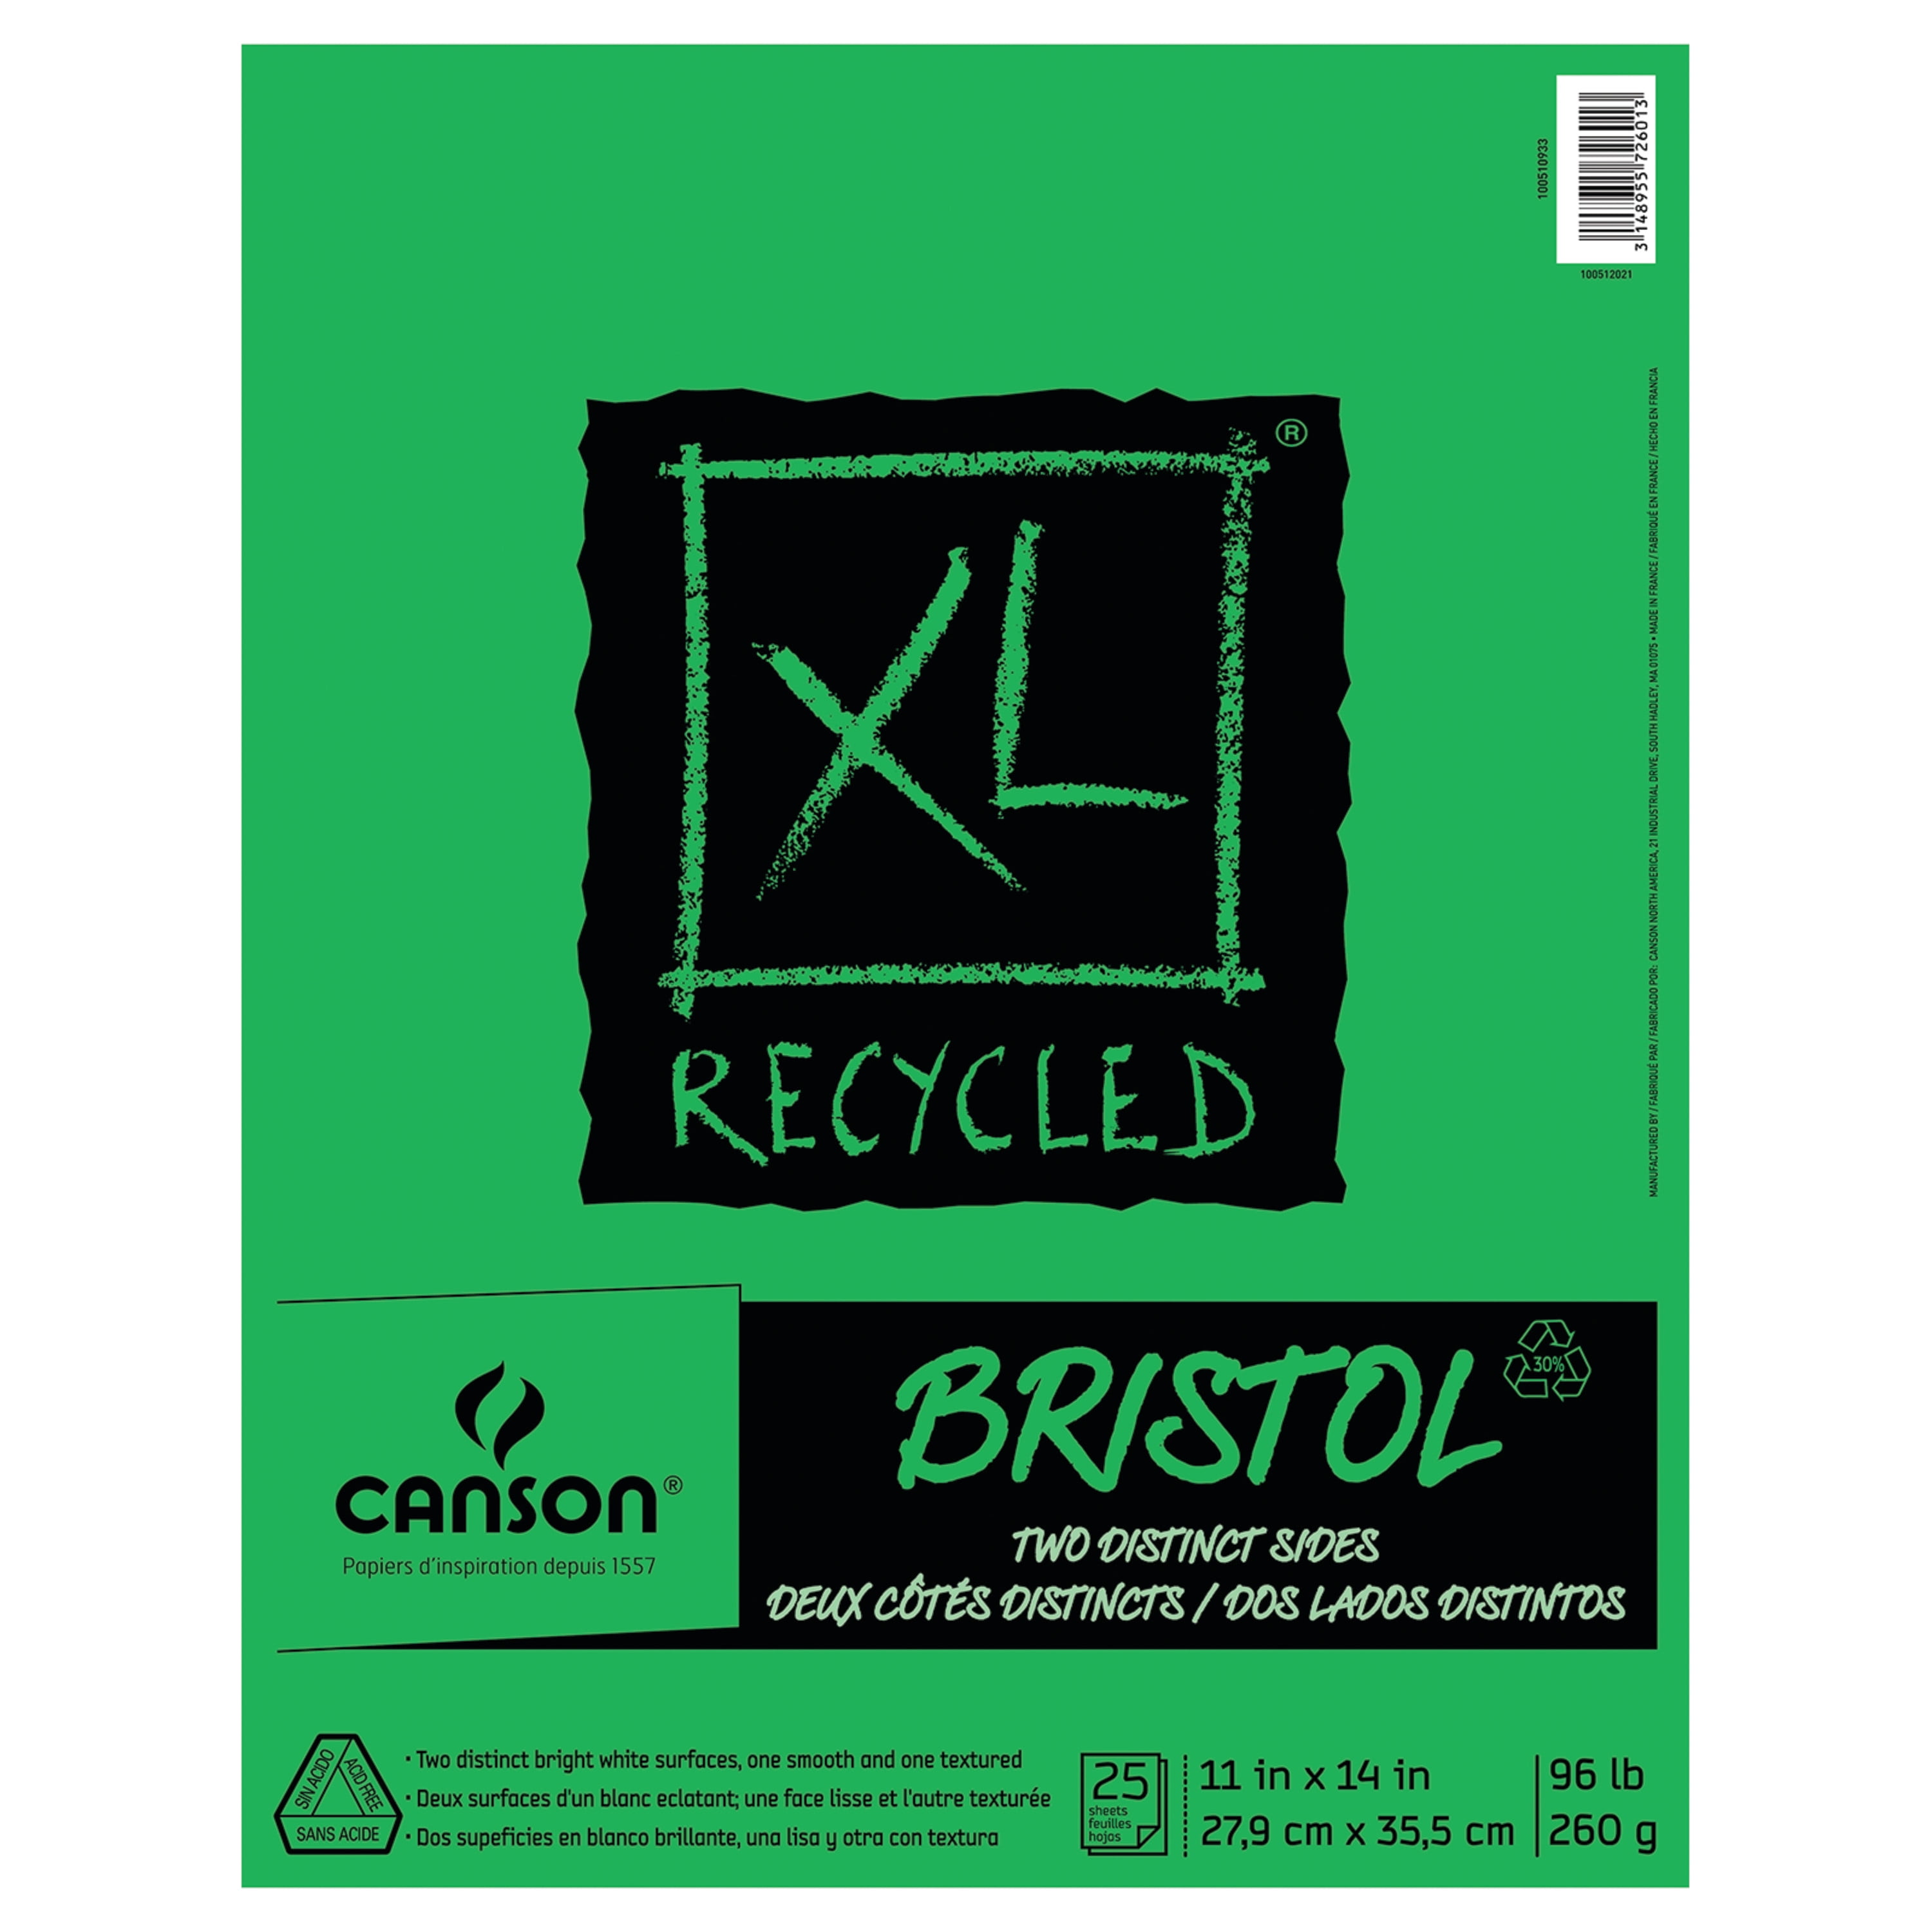 Canson XL Series Bristol Pad, Heavyweight Paper for Morocco